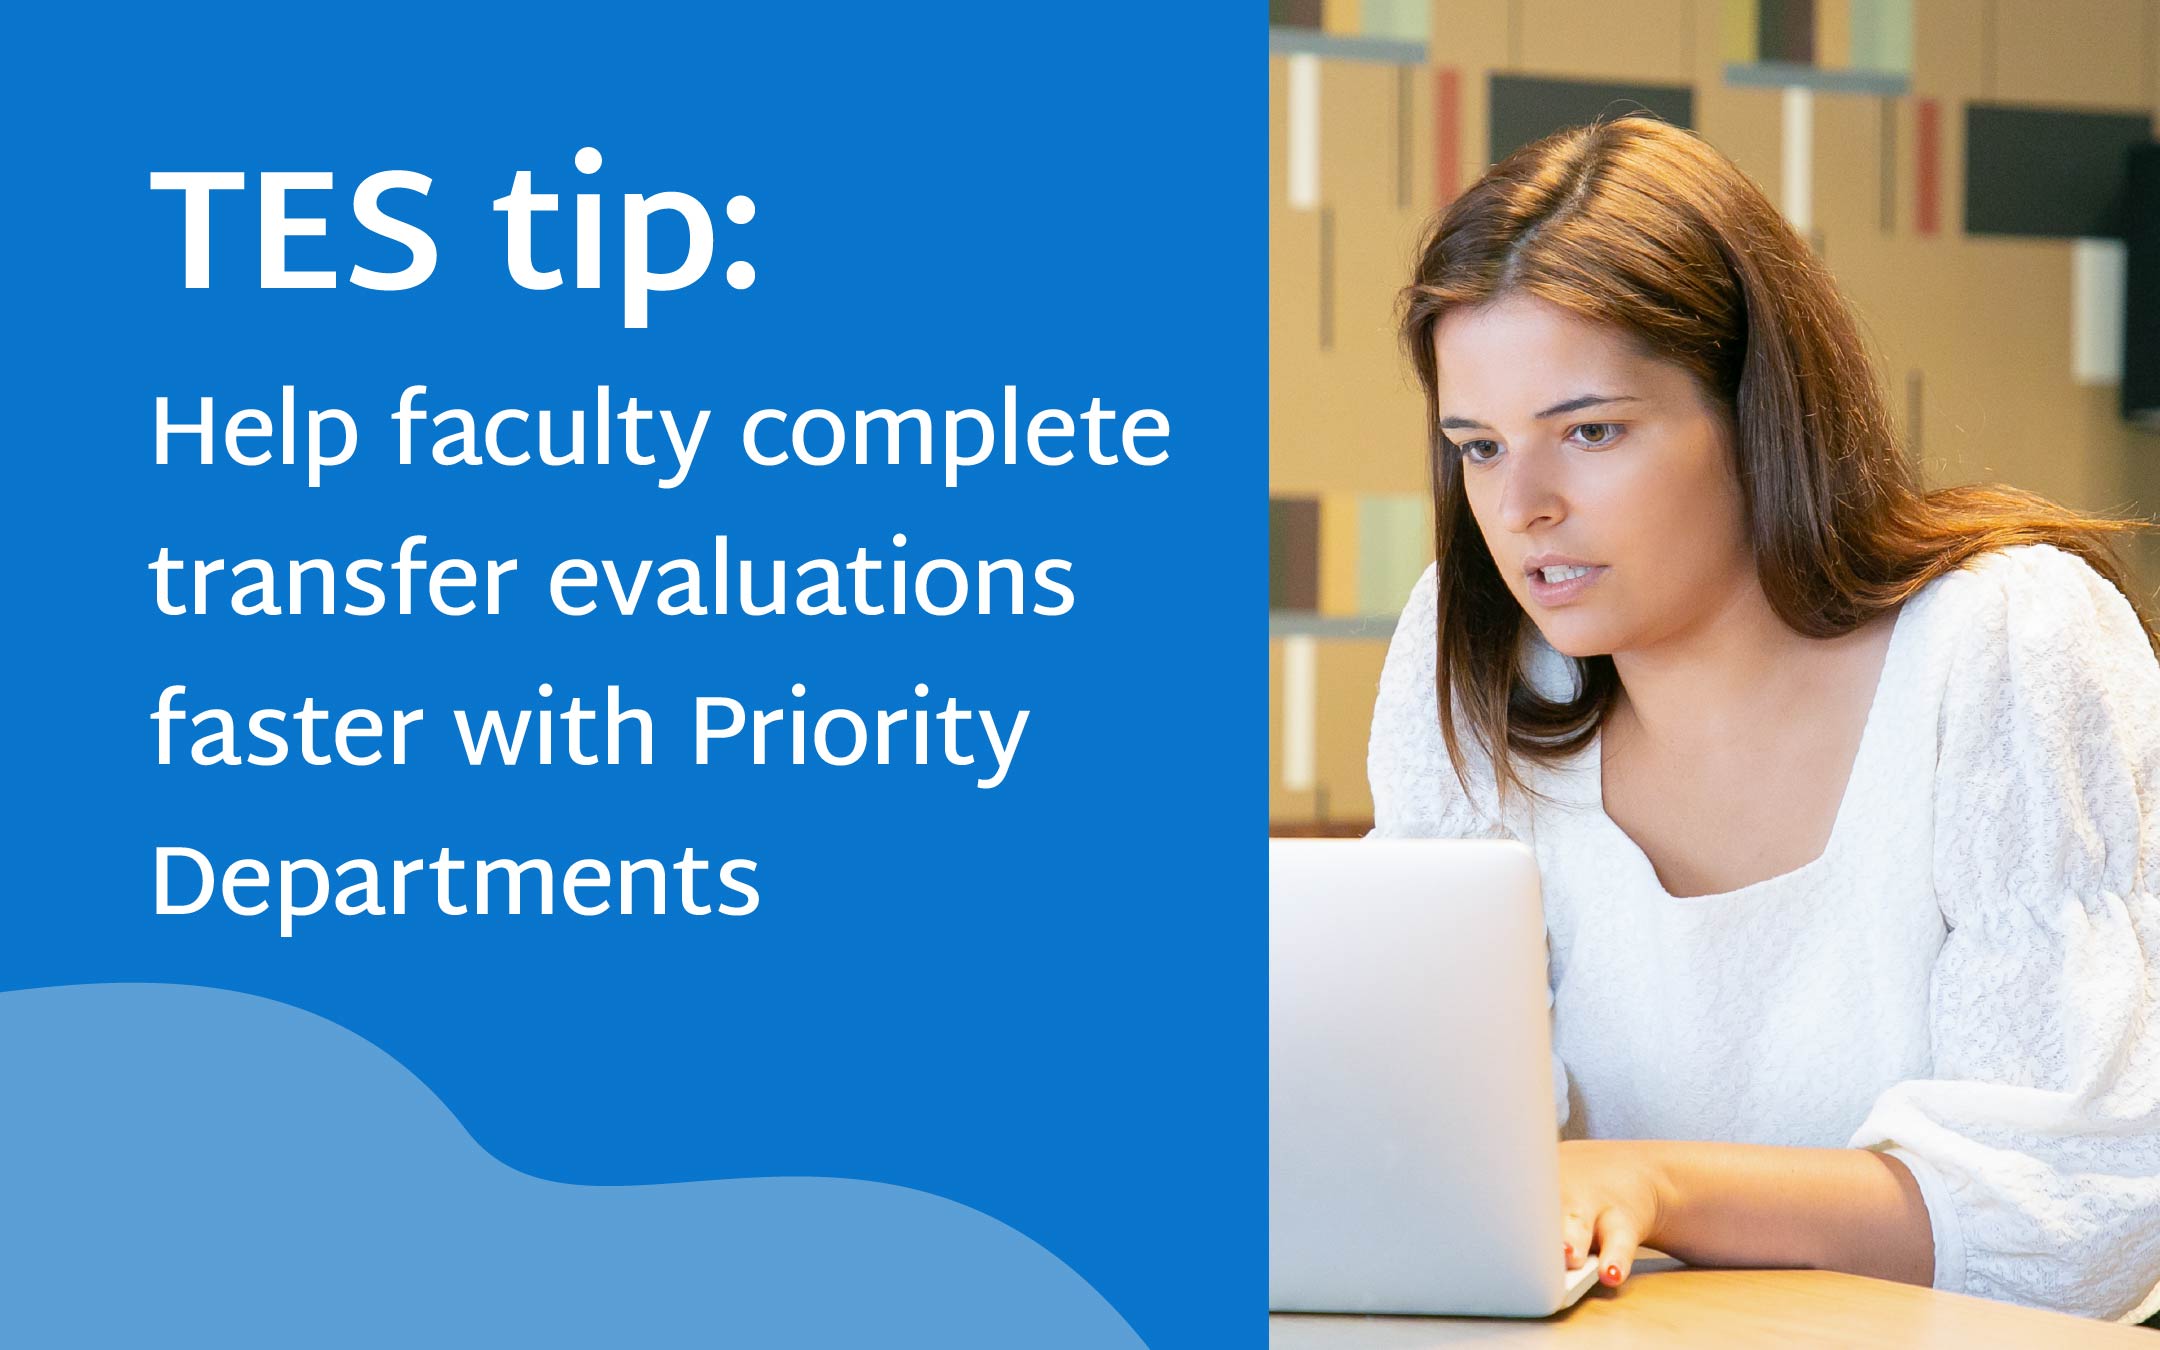 FB_TES-tip-Help-faculty-complete-transfer-evaluations-faster-with-priority-departments